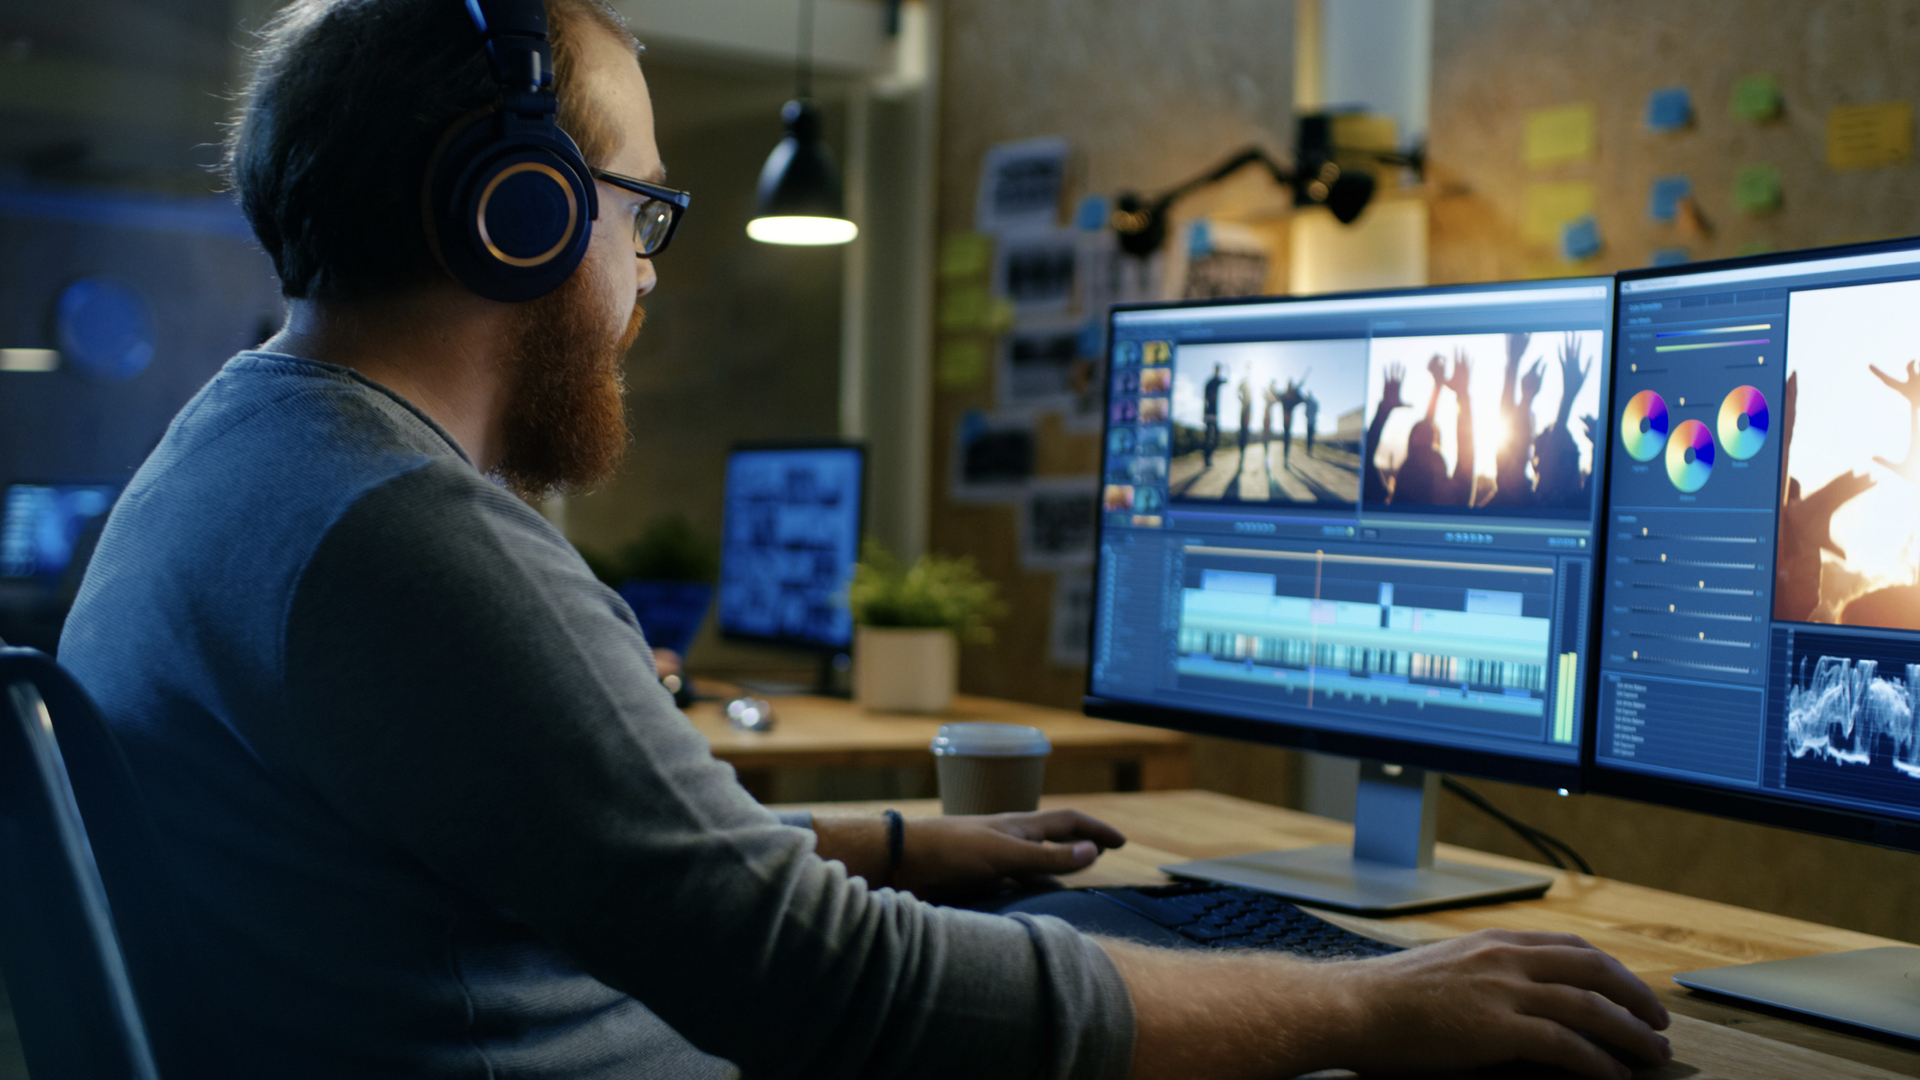 <p>Video editing involves turning raw video footage into polished, engaging content. If you enjoy working with videos, use tools like Adobe Premiere or Final Cut Pro. You can find gigs on sites like Upwork, Fiverr, or Freelancer.</p><p>Just edit videos for clients, adding effects, music, and transitions. It’s a creative way to help others tell their stories while making money.</p>